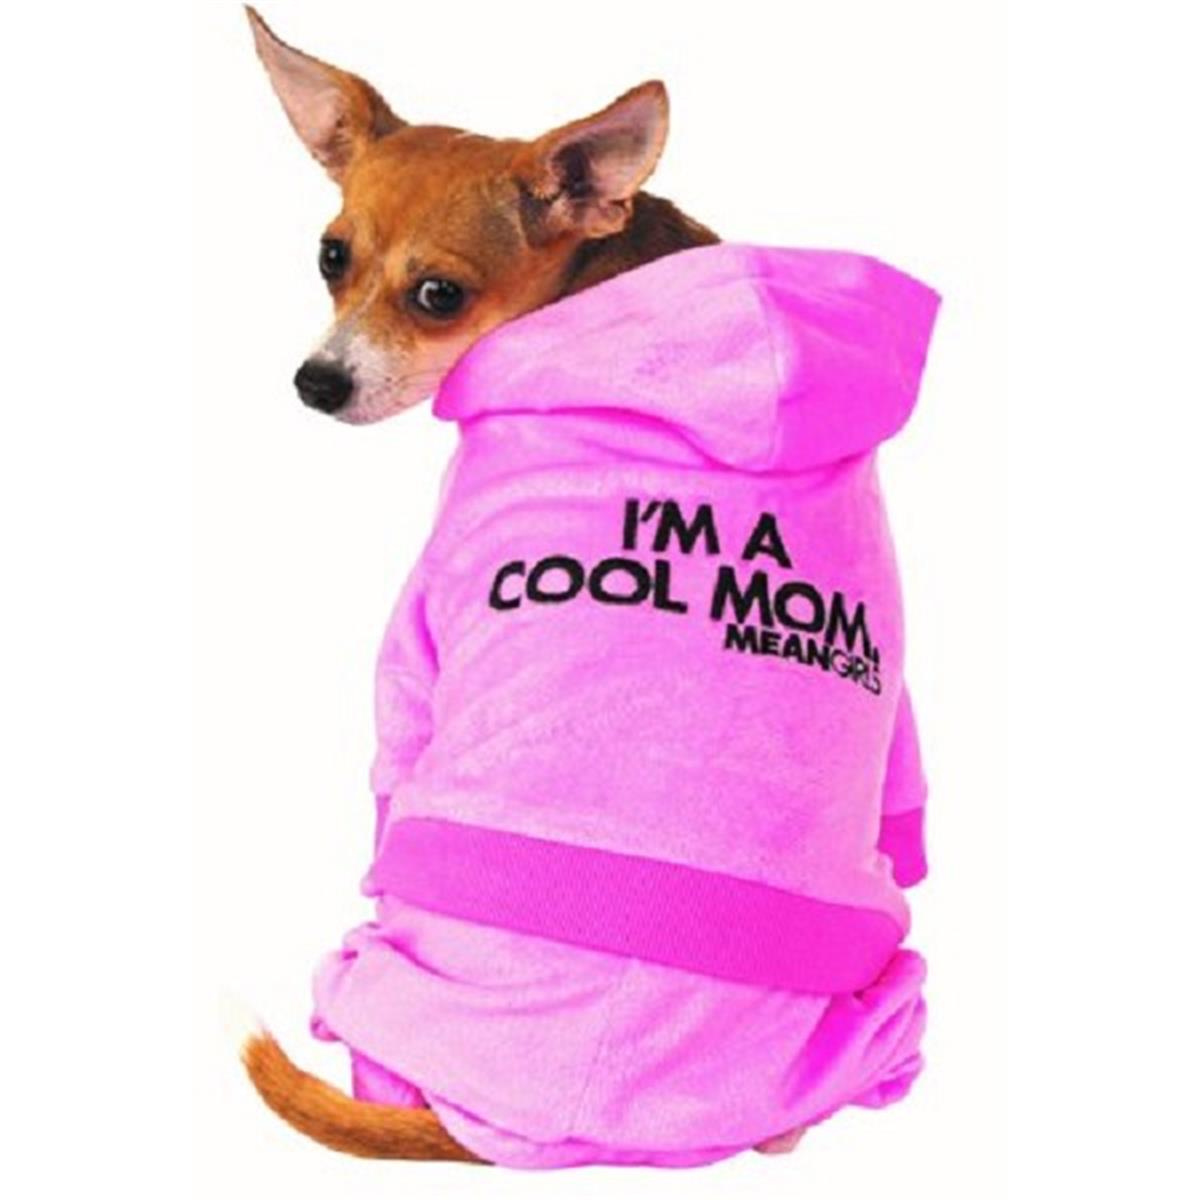 Rubies Costume 643111 Mean Girls Mom Track Suit Pet Costume, Small -  Rubie s Costume Co Inc